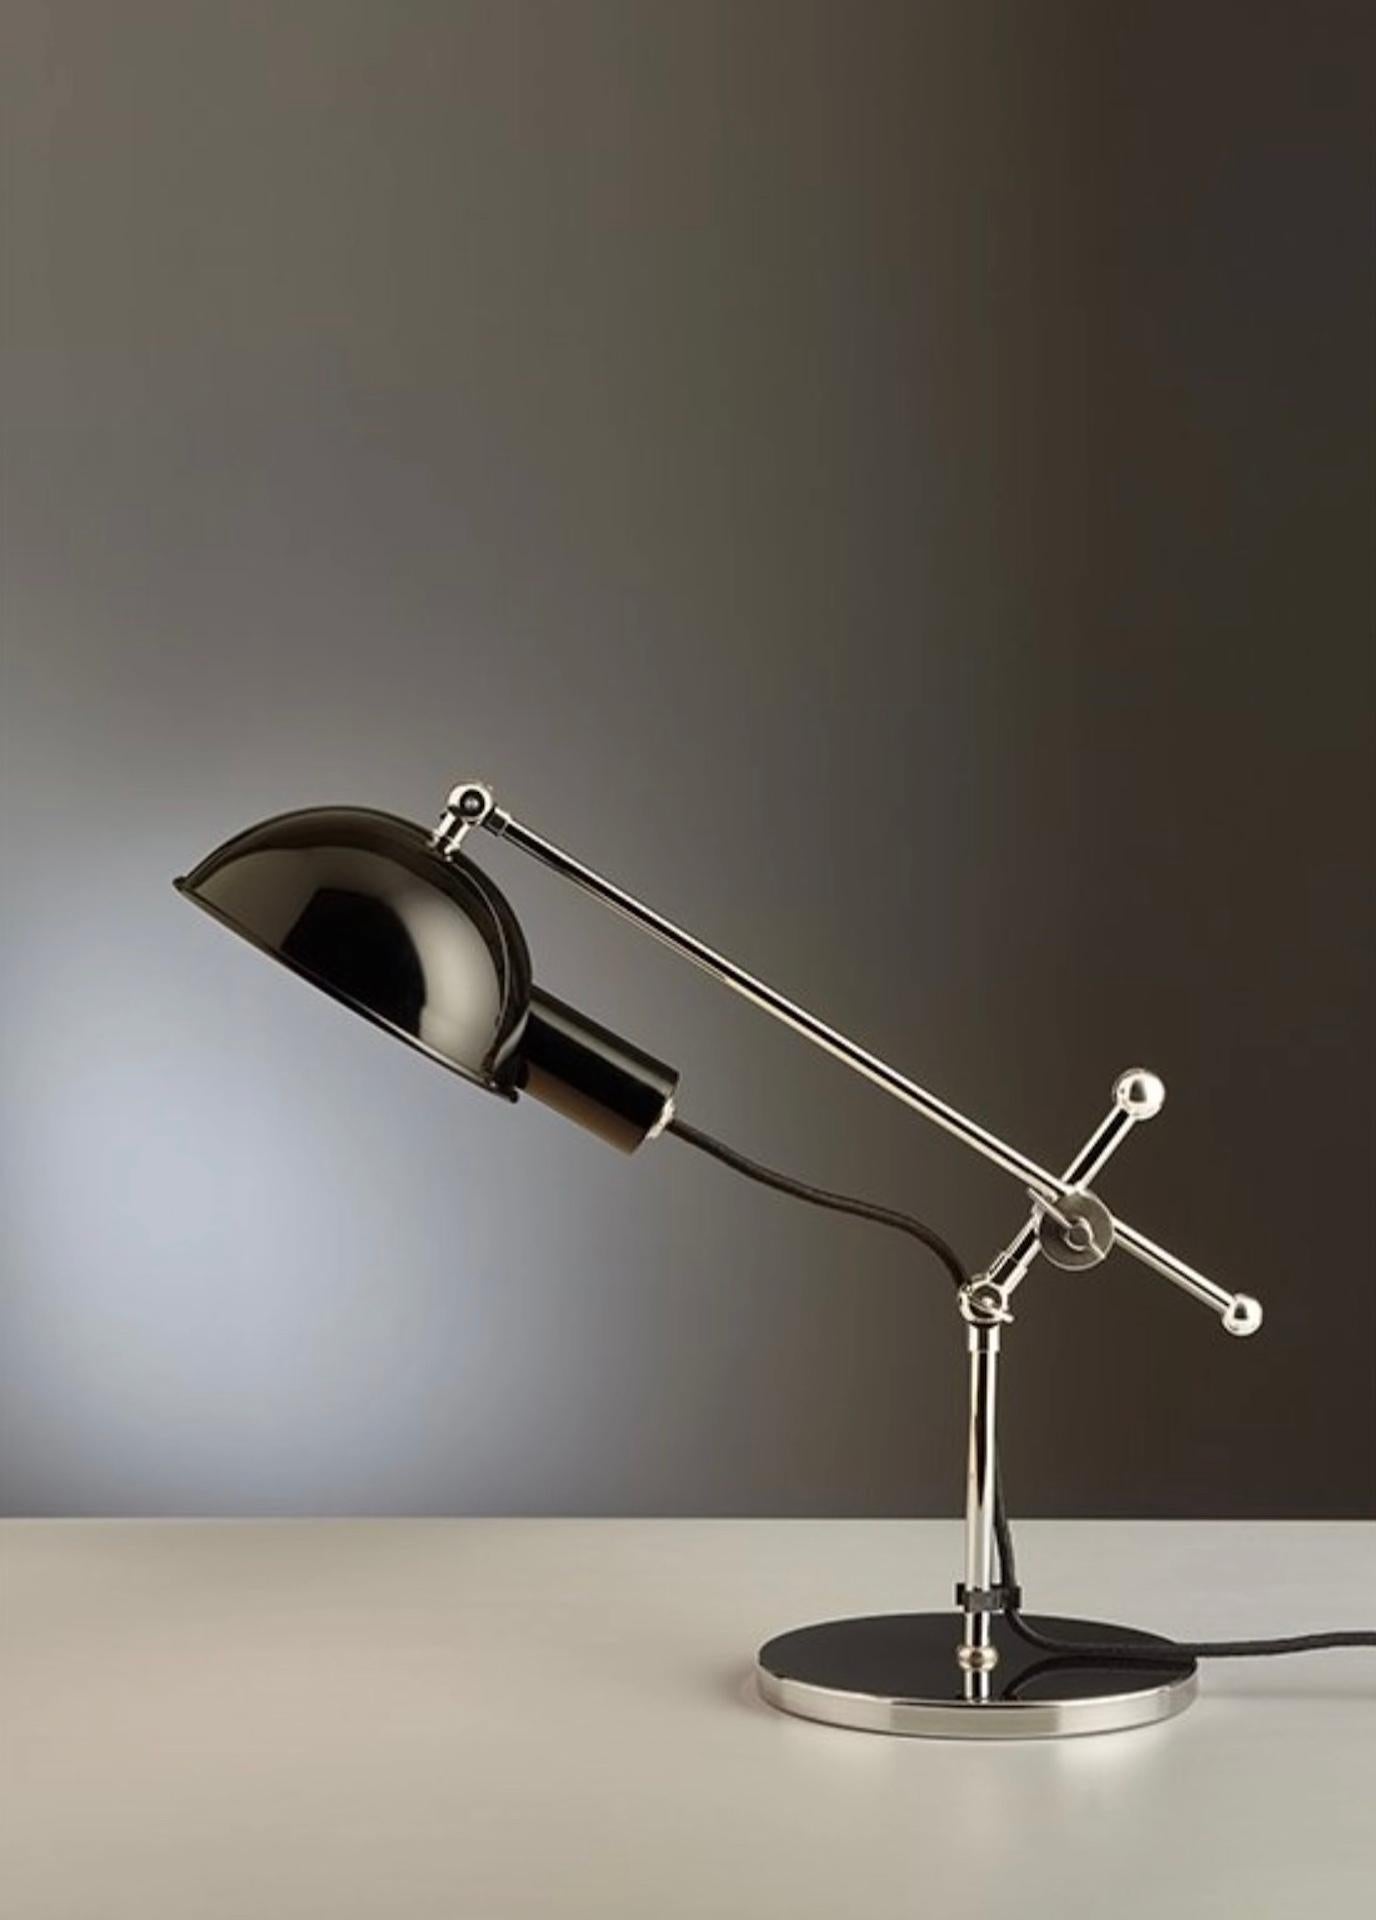 This table lamp has become a coveted designer object and the perfect reflection of Bauhaus design with its basic geometric shapes and asymmetrical elements. It was created in 1927, but its designer is sadly unknown. Its striking hemisphere is made